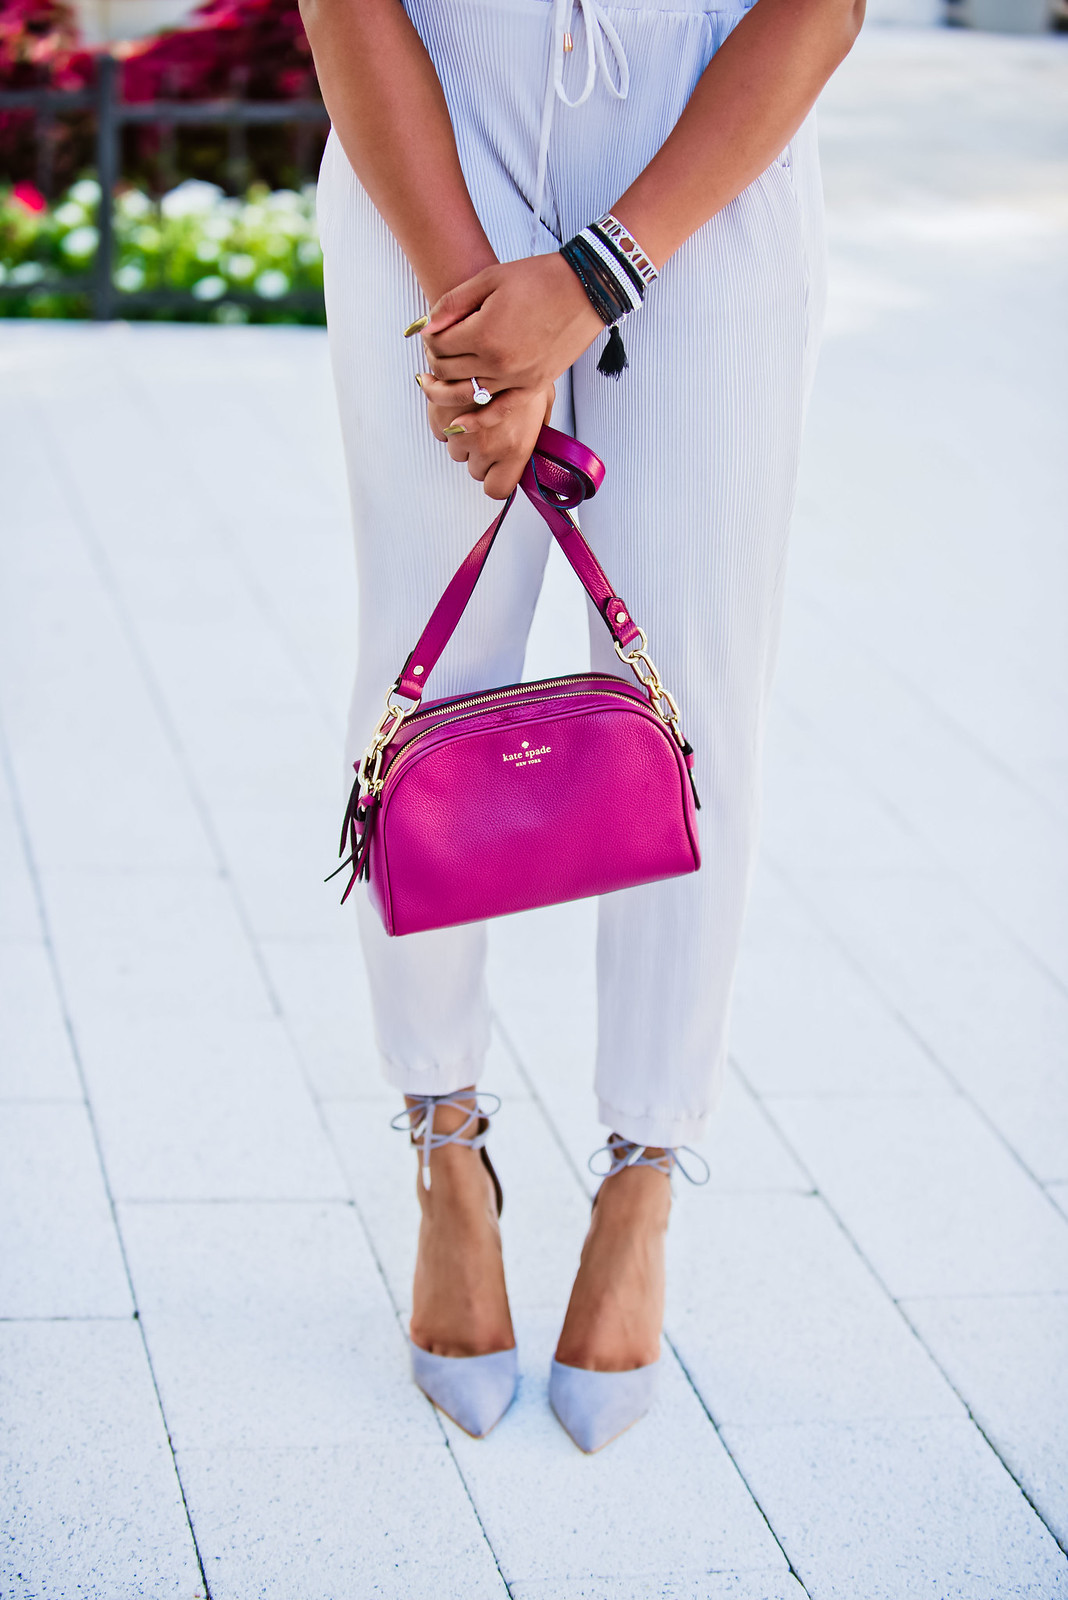 how to style a pink handbag